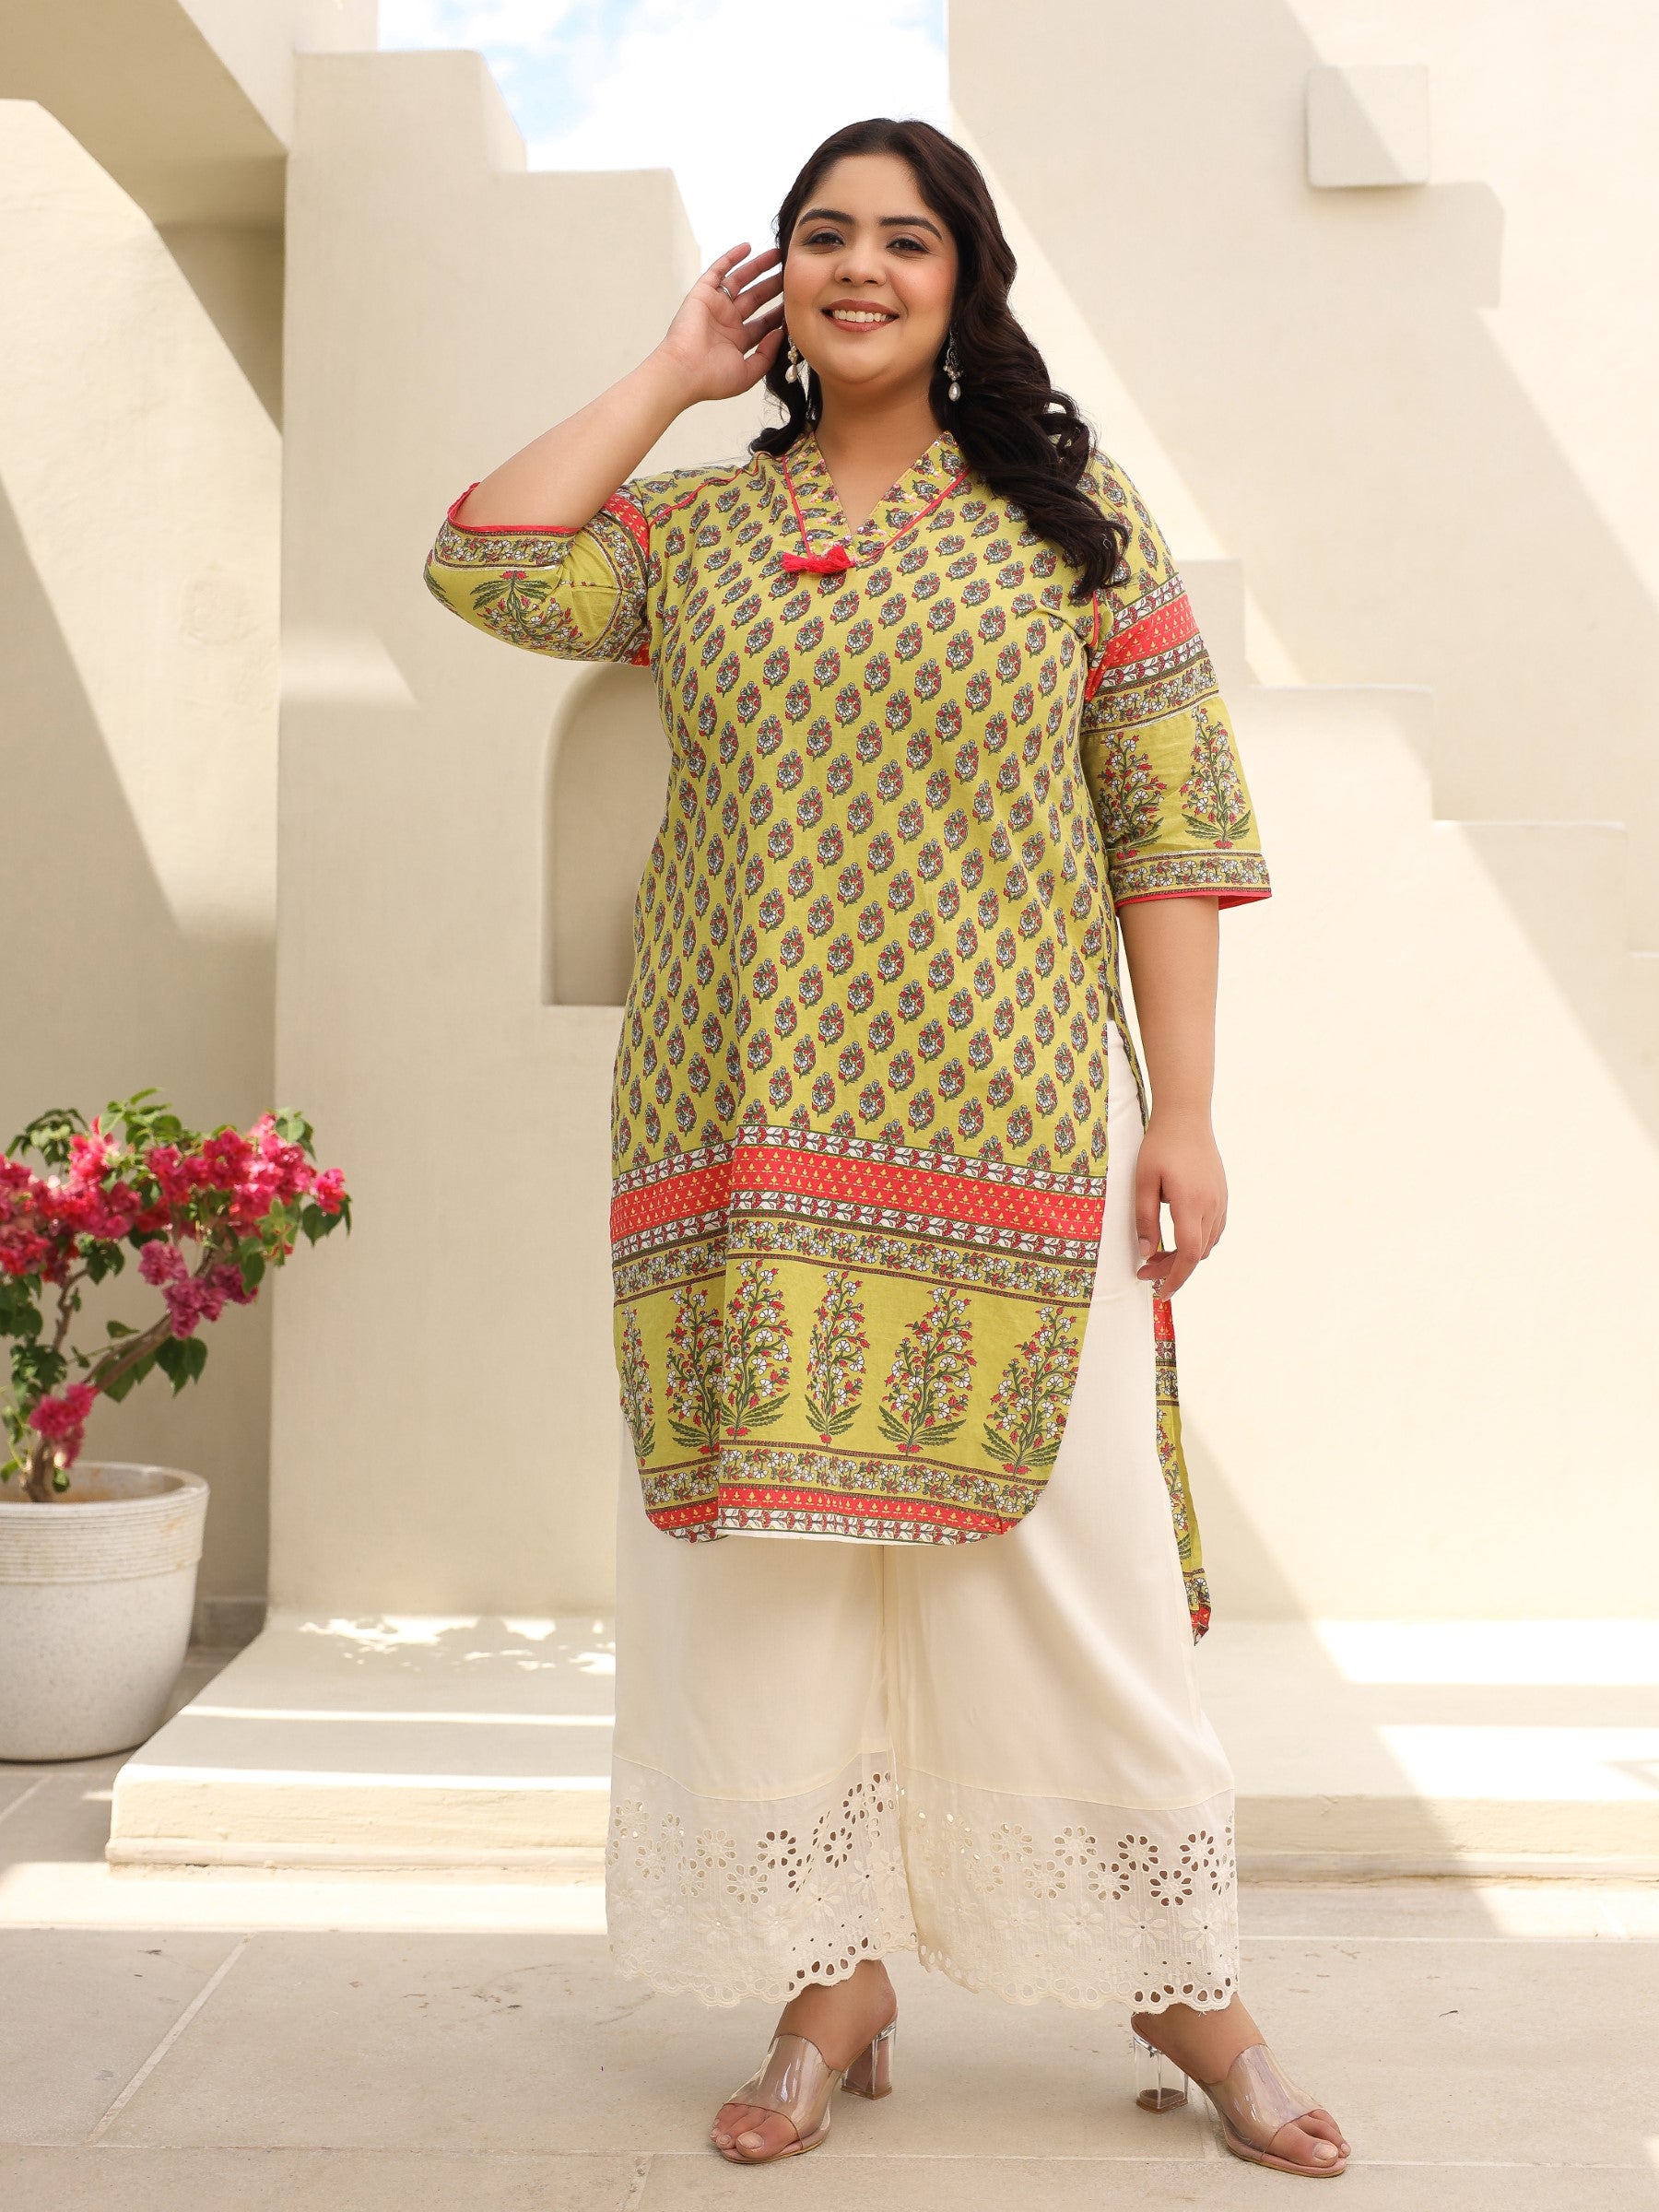 The Madhubala Women Lime Green Ethnic Motif Printed High Low Cotton Plus Size Kurta With Kaudis Tassels & Contract Piping